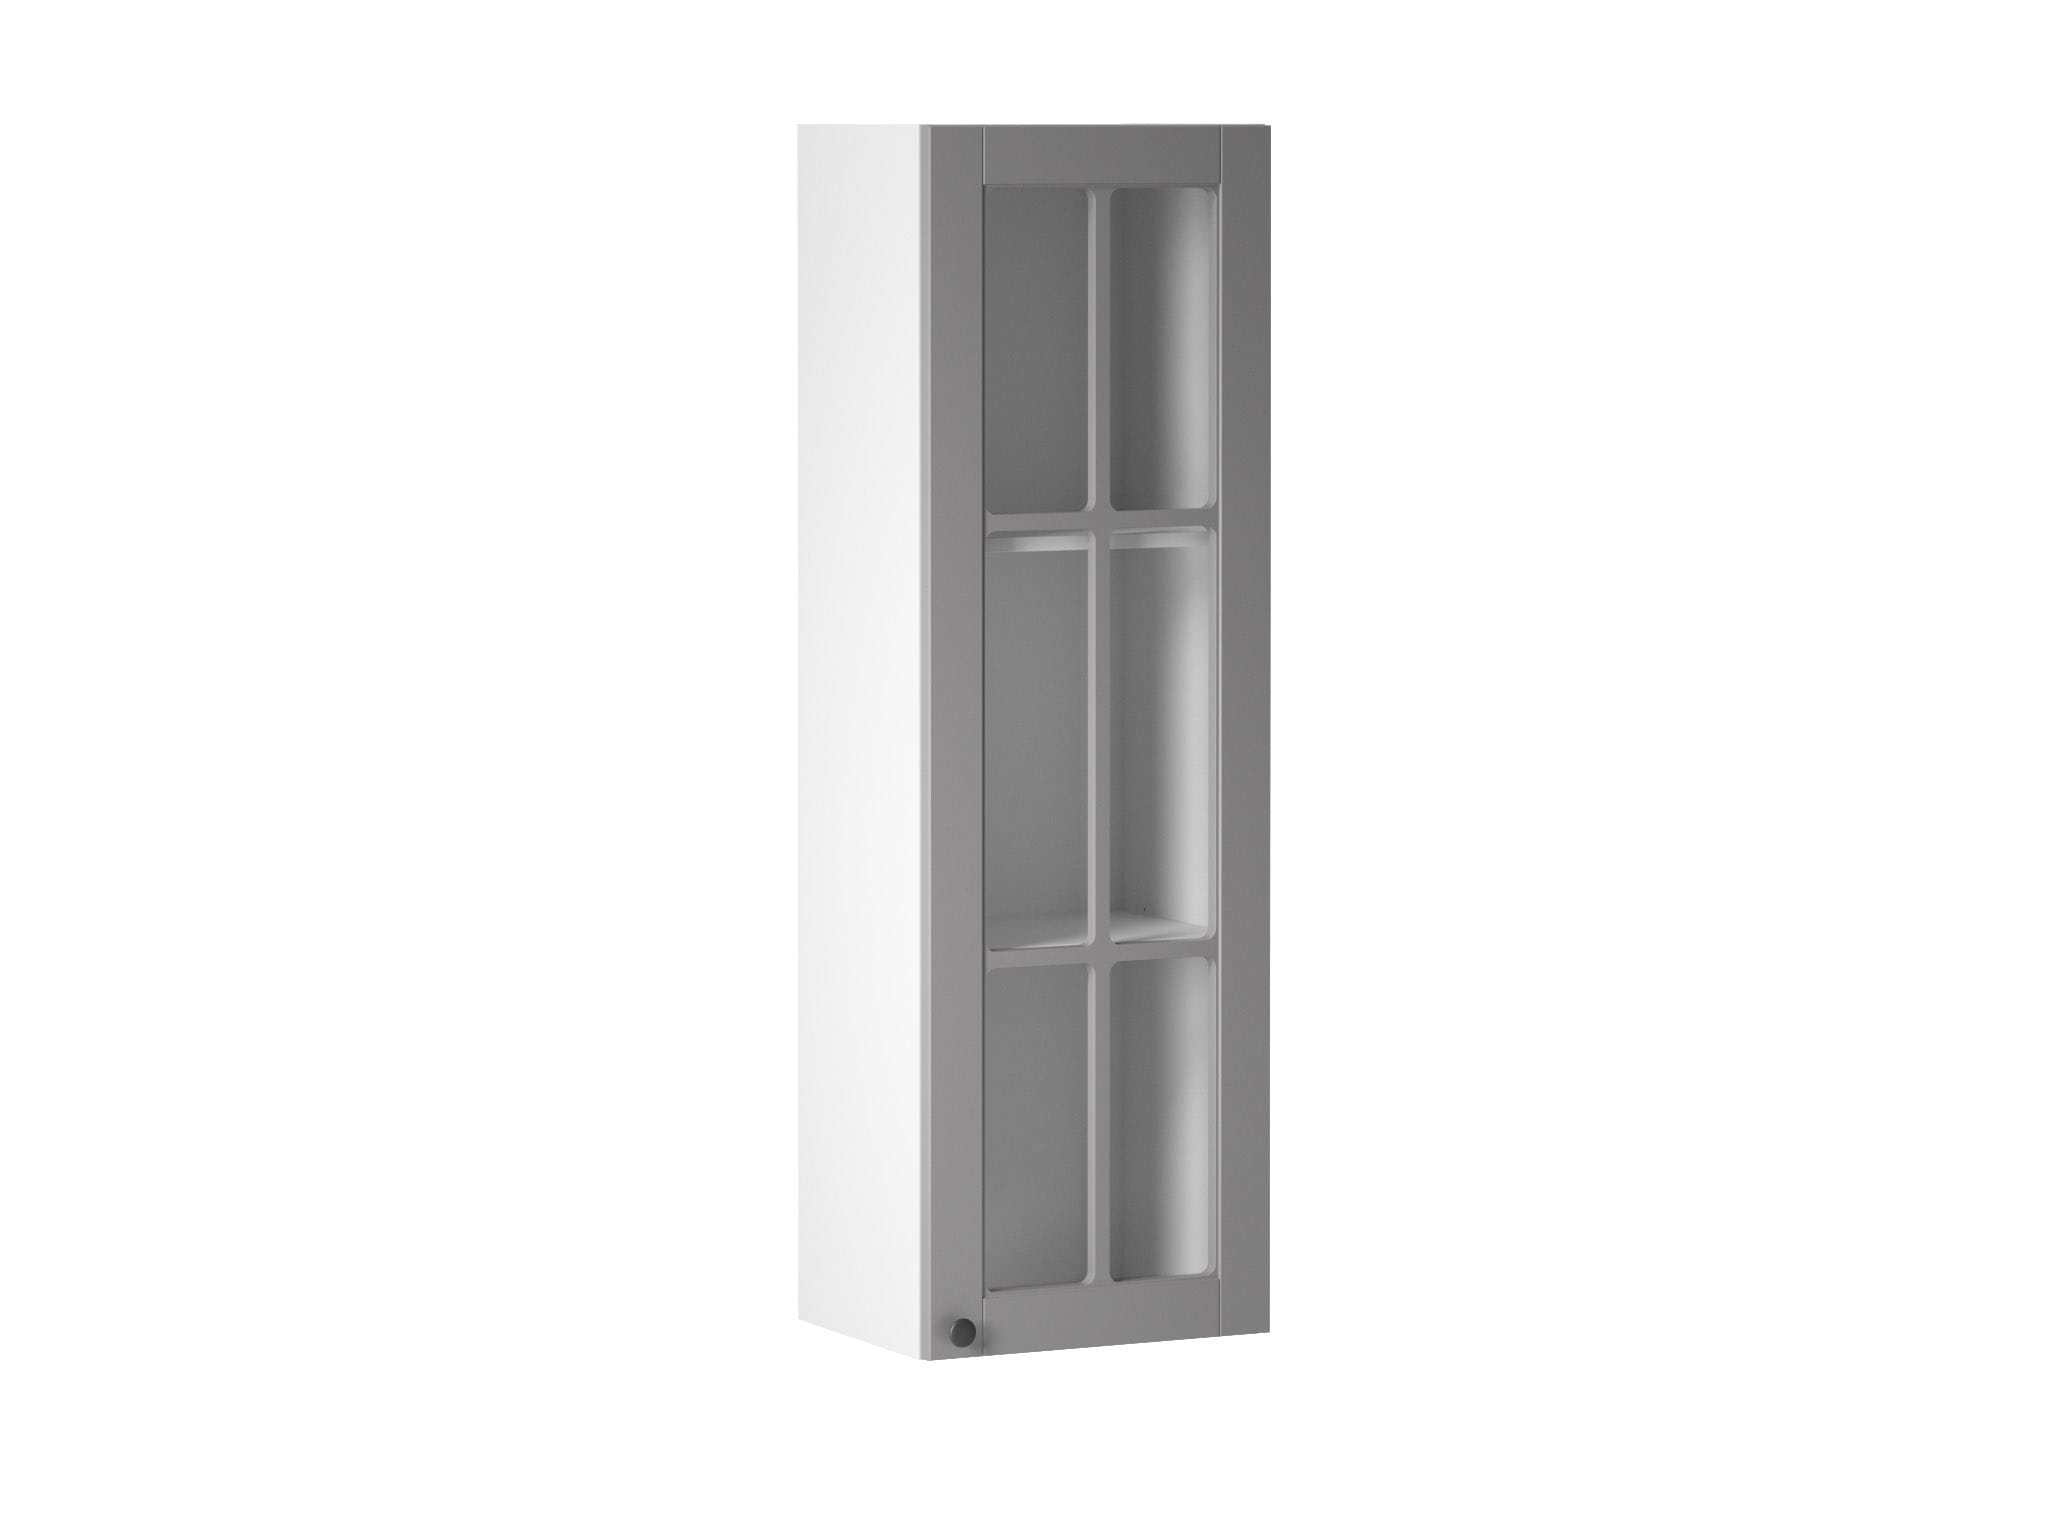 WHITE NARROW WALL MOUNTED KITCHEN CABINET IN MODERN DESIGN W40S